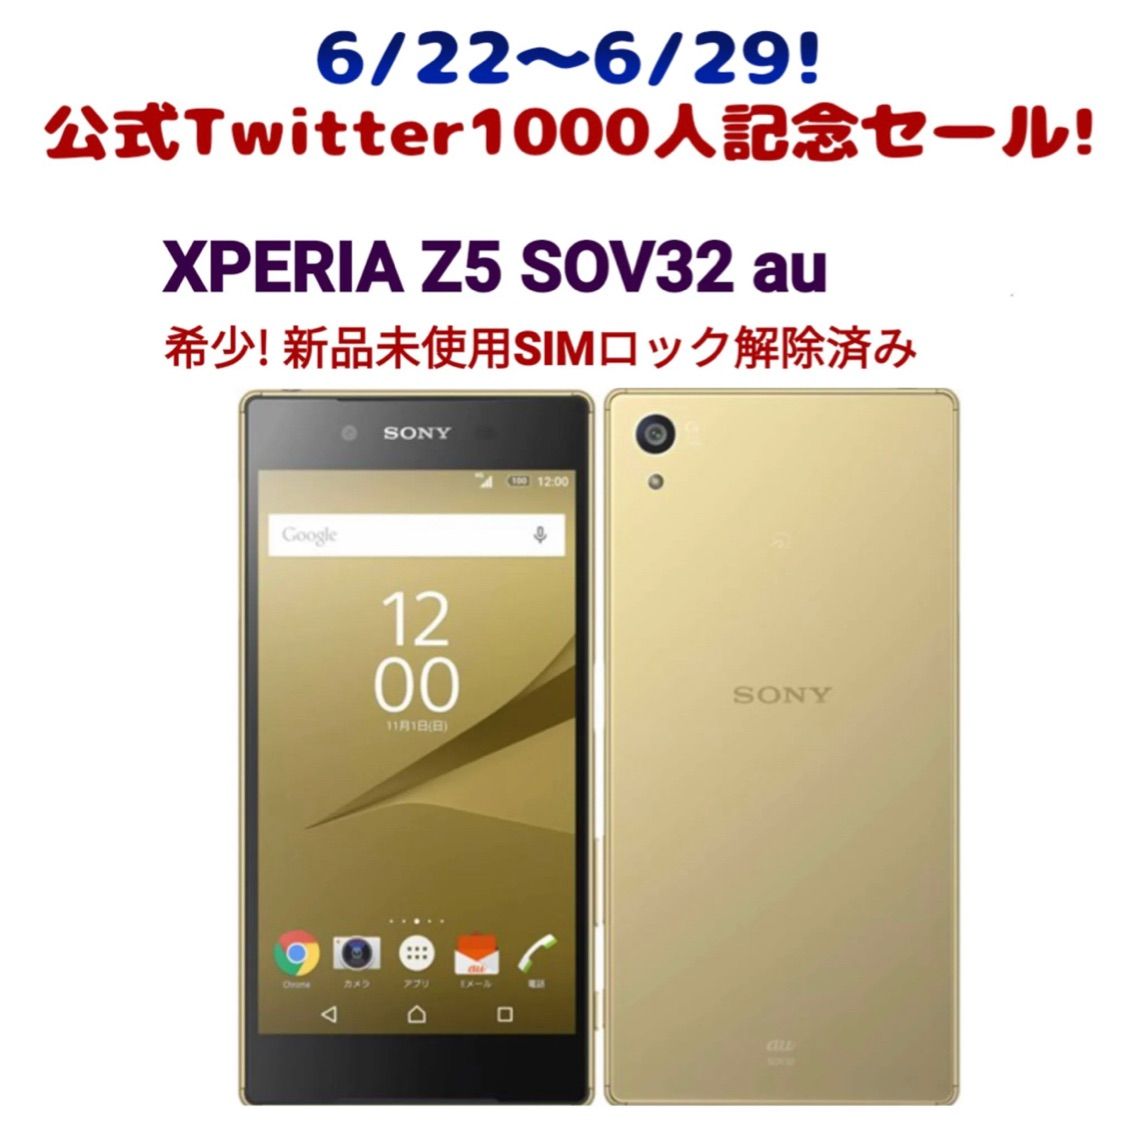 Xperia Z5 Gold(SO-01H)用コーナーキャップ1個